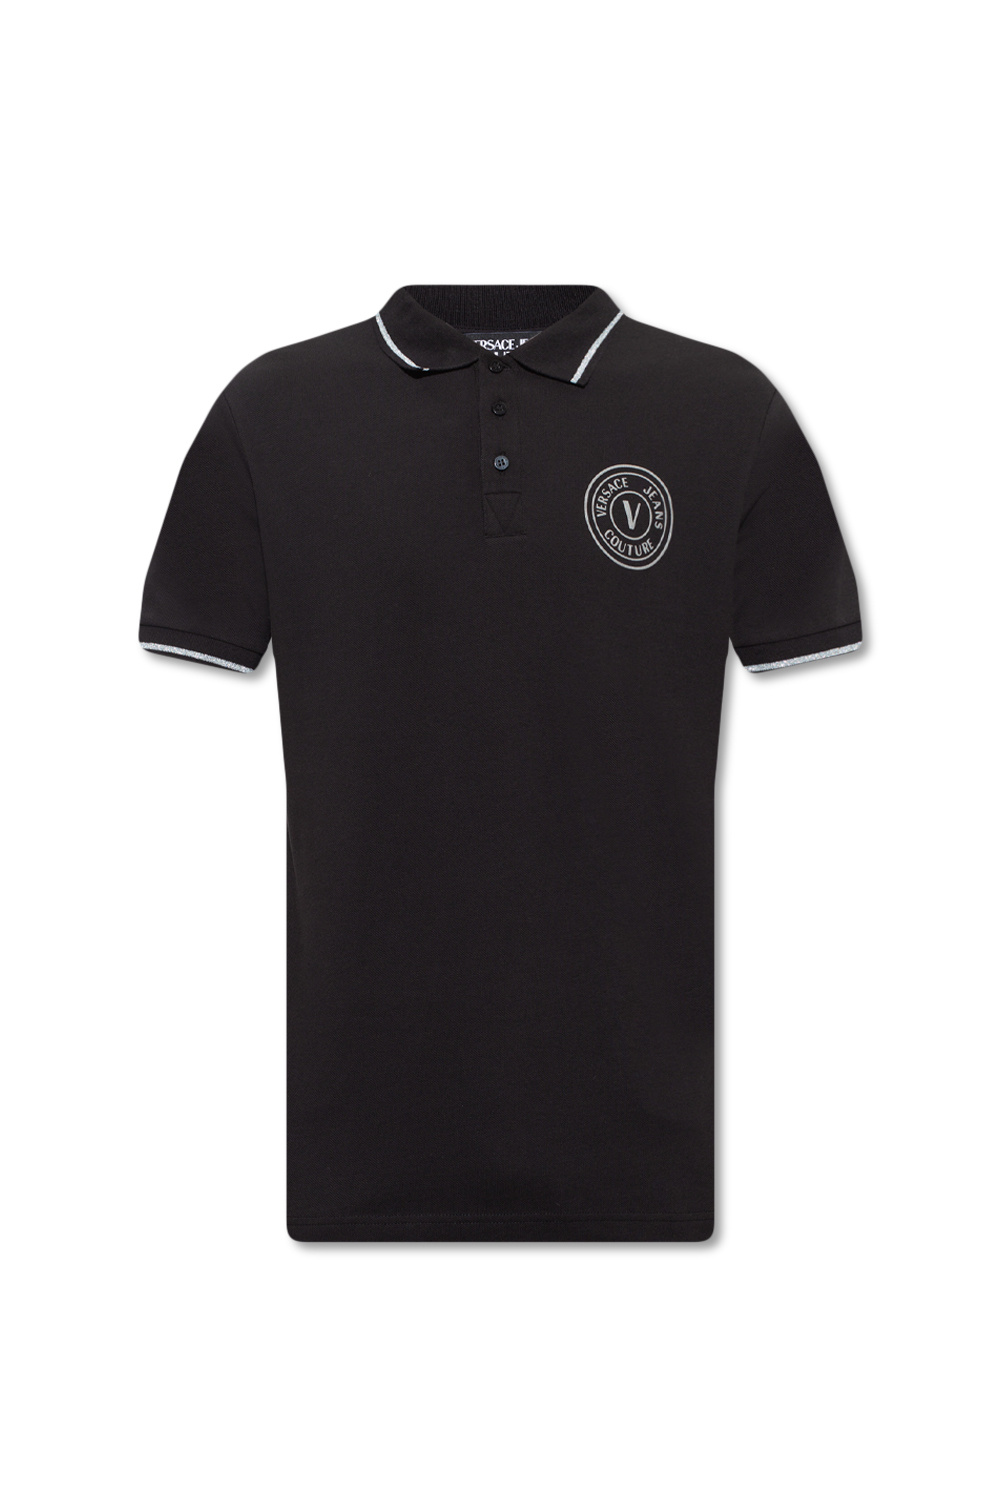 Versace Jeans Couture Fred Perry Twin Tipped Polo Langarmshirt Herren